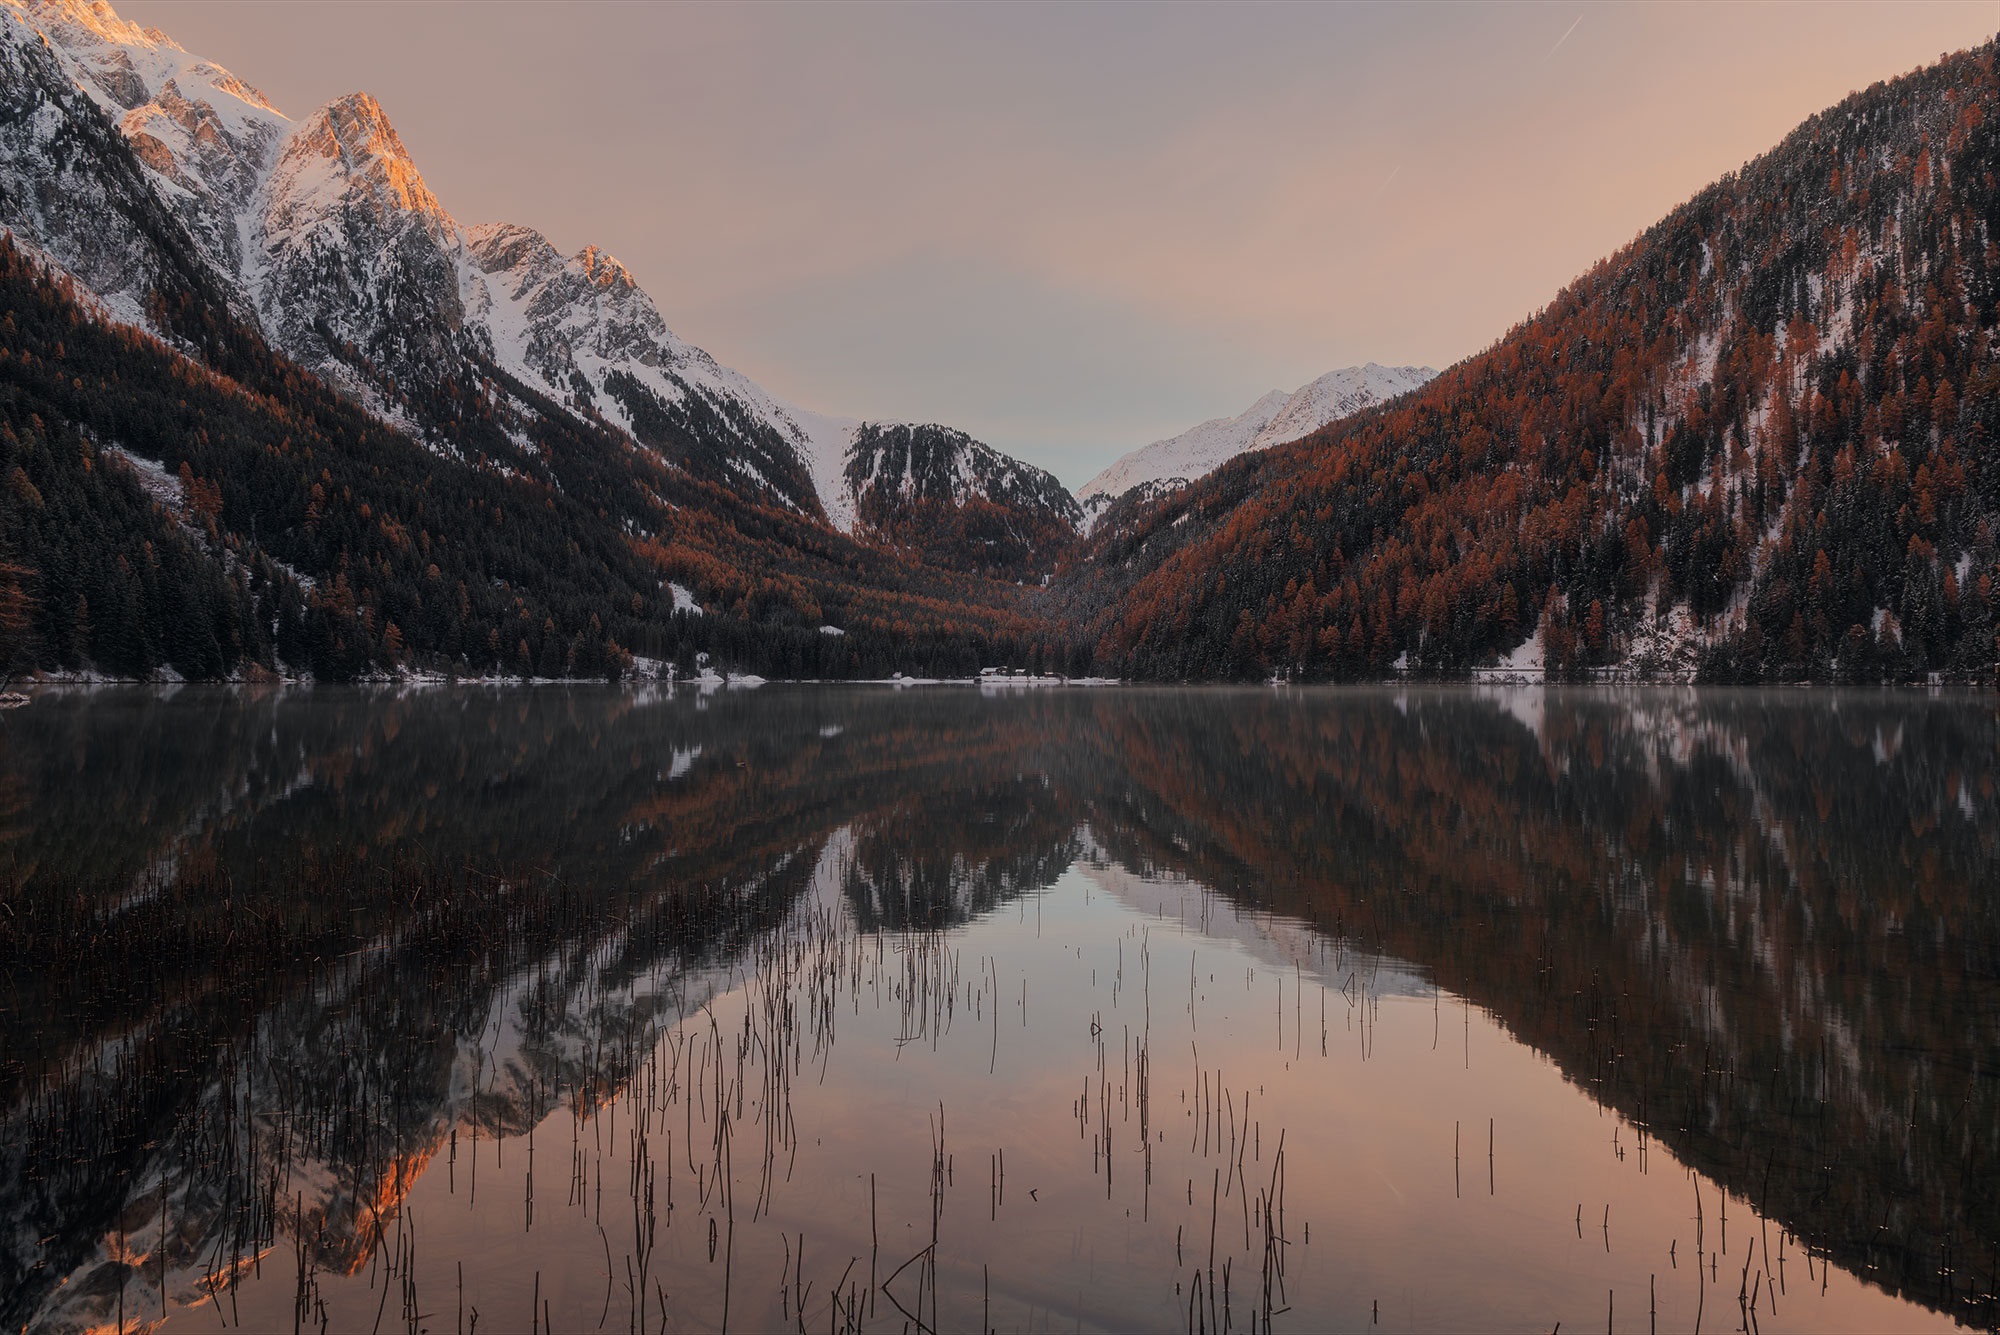 Embark on a visual journey through the stunning landscapes of the Dolomites, Italy, with acclaimed photographer Jennifer Esseiva. Witness the mesmerizing beauty of an orange sunrise over the tranquil Anterselva lake, expertly captured by Jennifer's skilled hands and her trusted Nikon D810 camera. Each image tells a story of nature's breathtaking splendor, inviting viewers to immerse themselves in the ethereal charm of Italy's iconic scenery. Let Jennifer Esseiva's captivating photographs transport you to a world where every sunrise paints the sky with hues of orange and gold, illuminating the majestic peaks of the Dolomites in a breathtaking display of beauty. Experience the magic of landscape photography at its finest, courtesy of Jennifer Esseiva's masterful artistry.